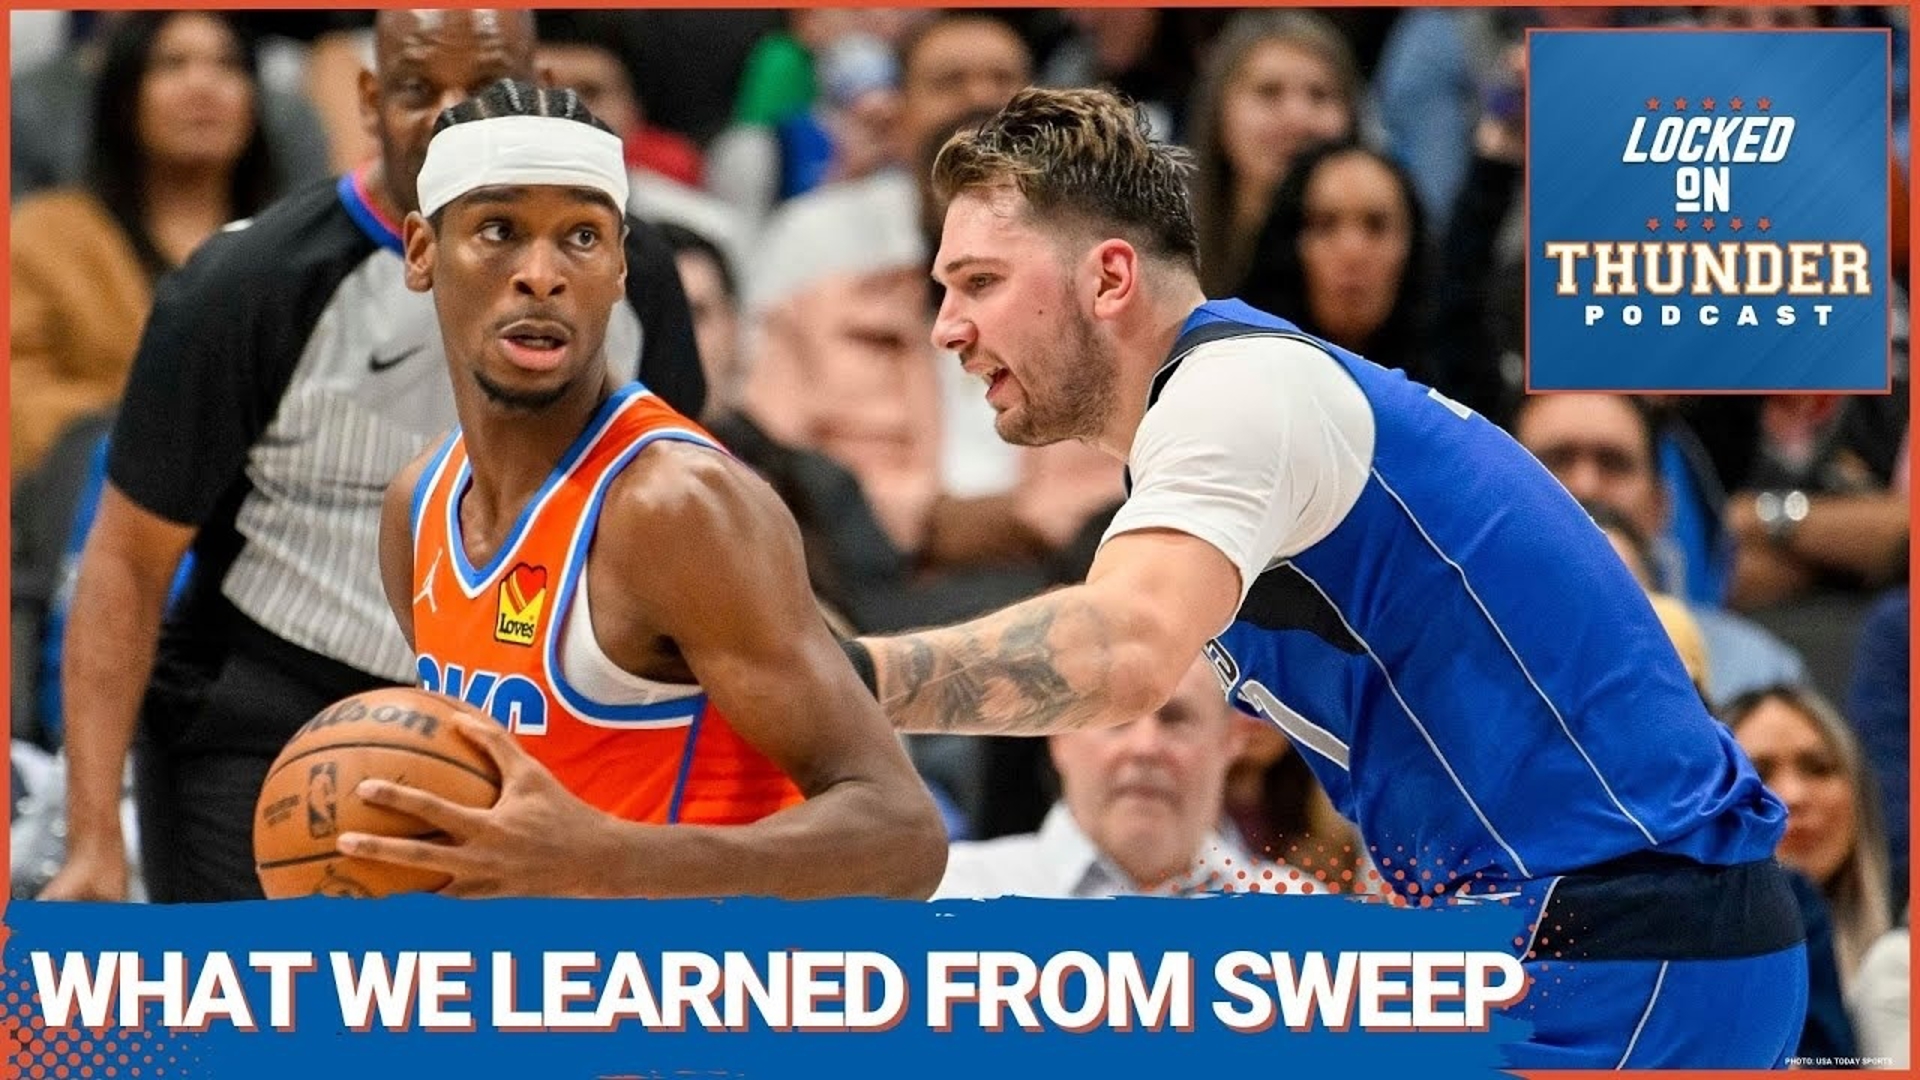 The Oklahoma City Thunder taught us a few things about who they are in their NBA Playoffs First Round Sweep over the New Orleans Pelicans.